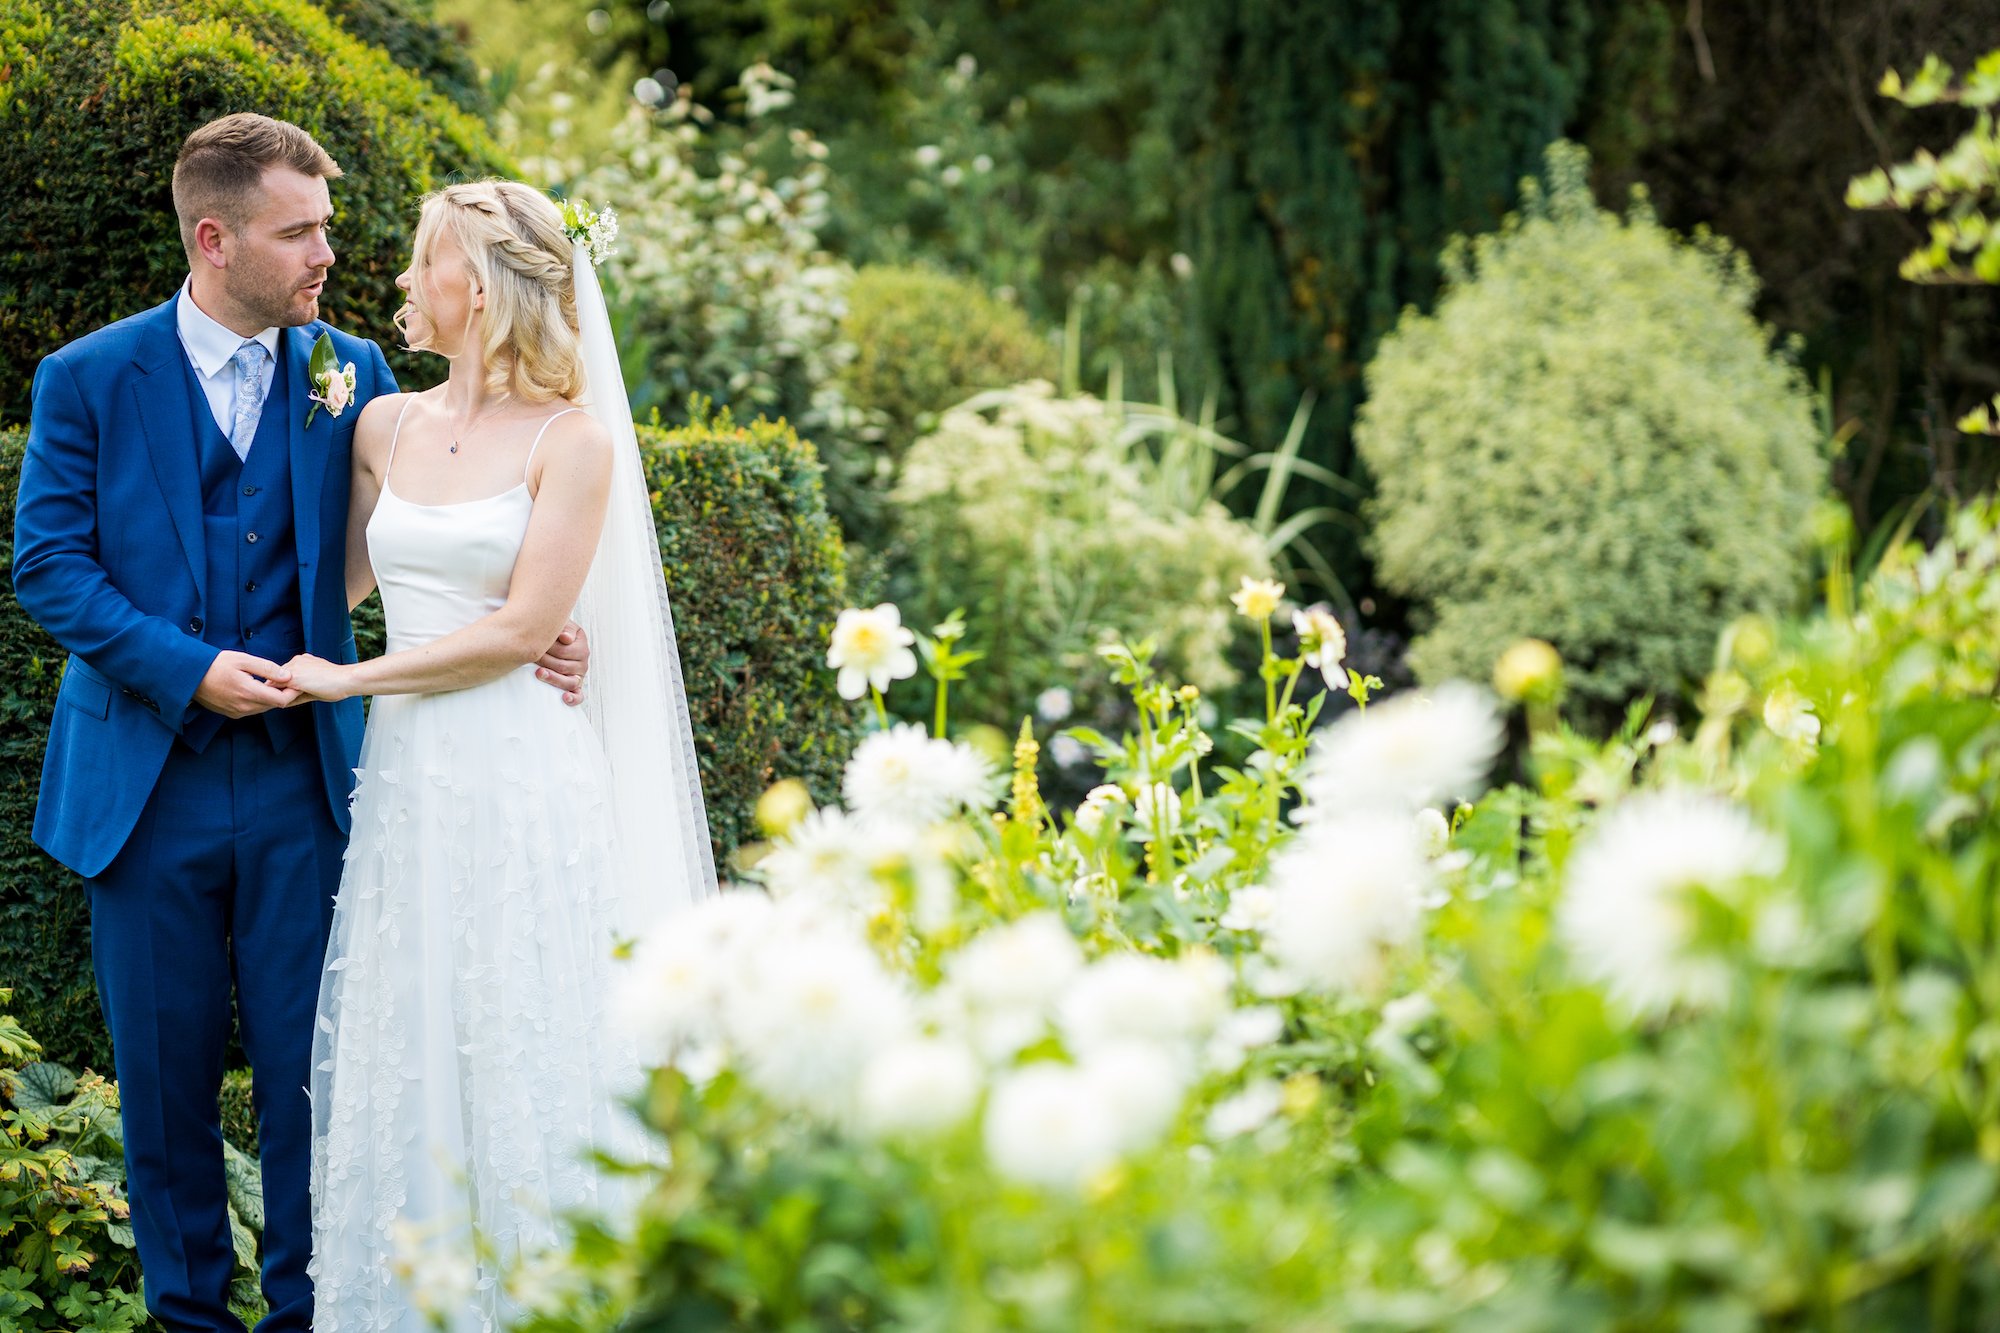 Beautiful bride Emily wore the Finsbury wedding dress and Beale overskirt by Halfpenny London on her wedding day